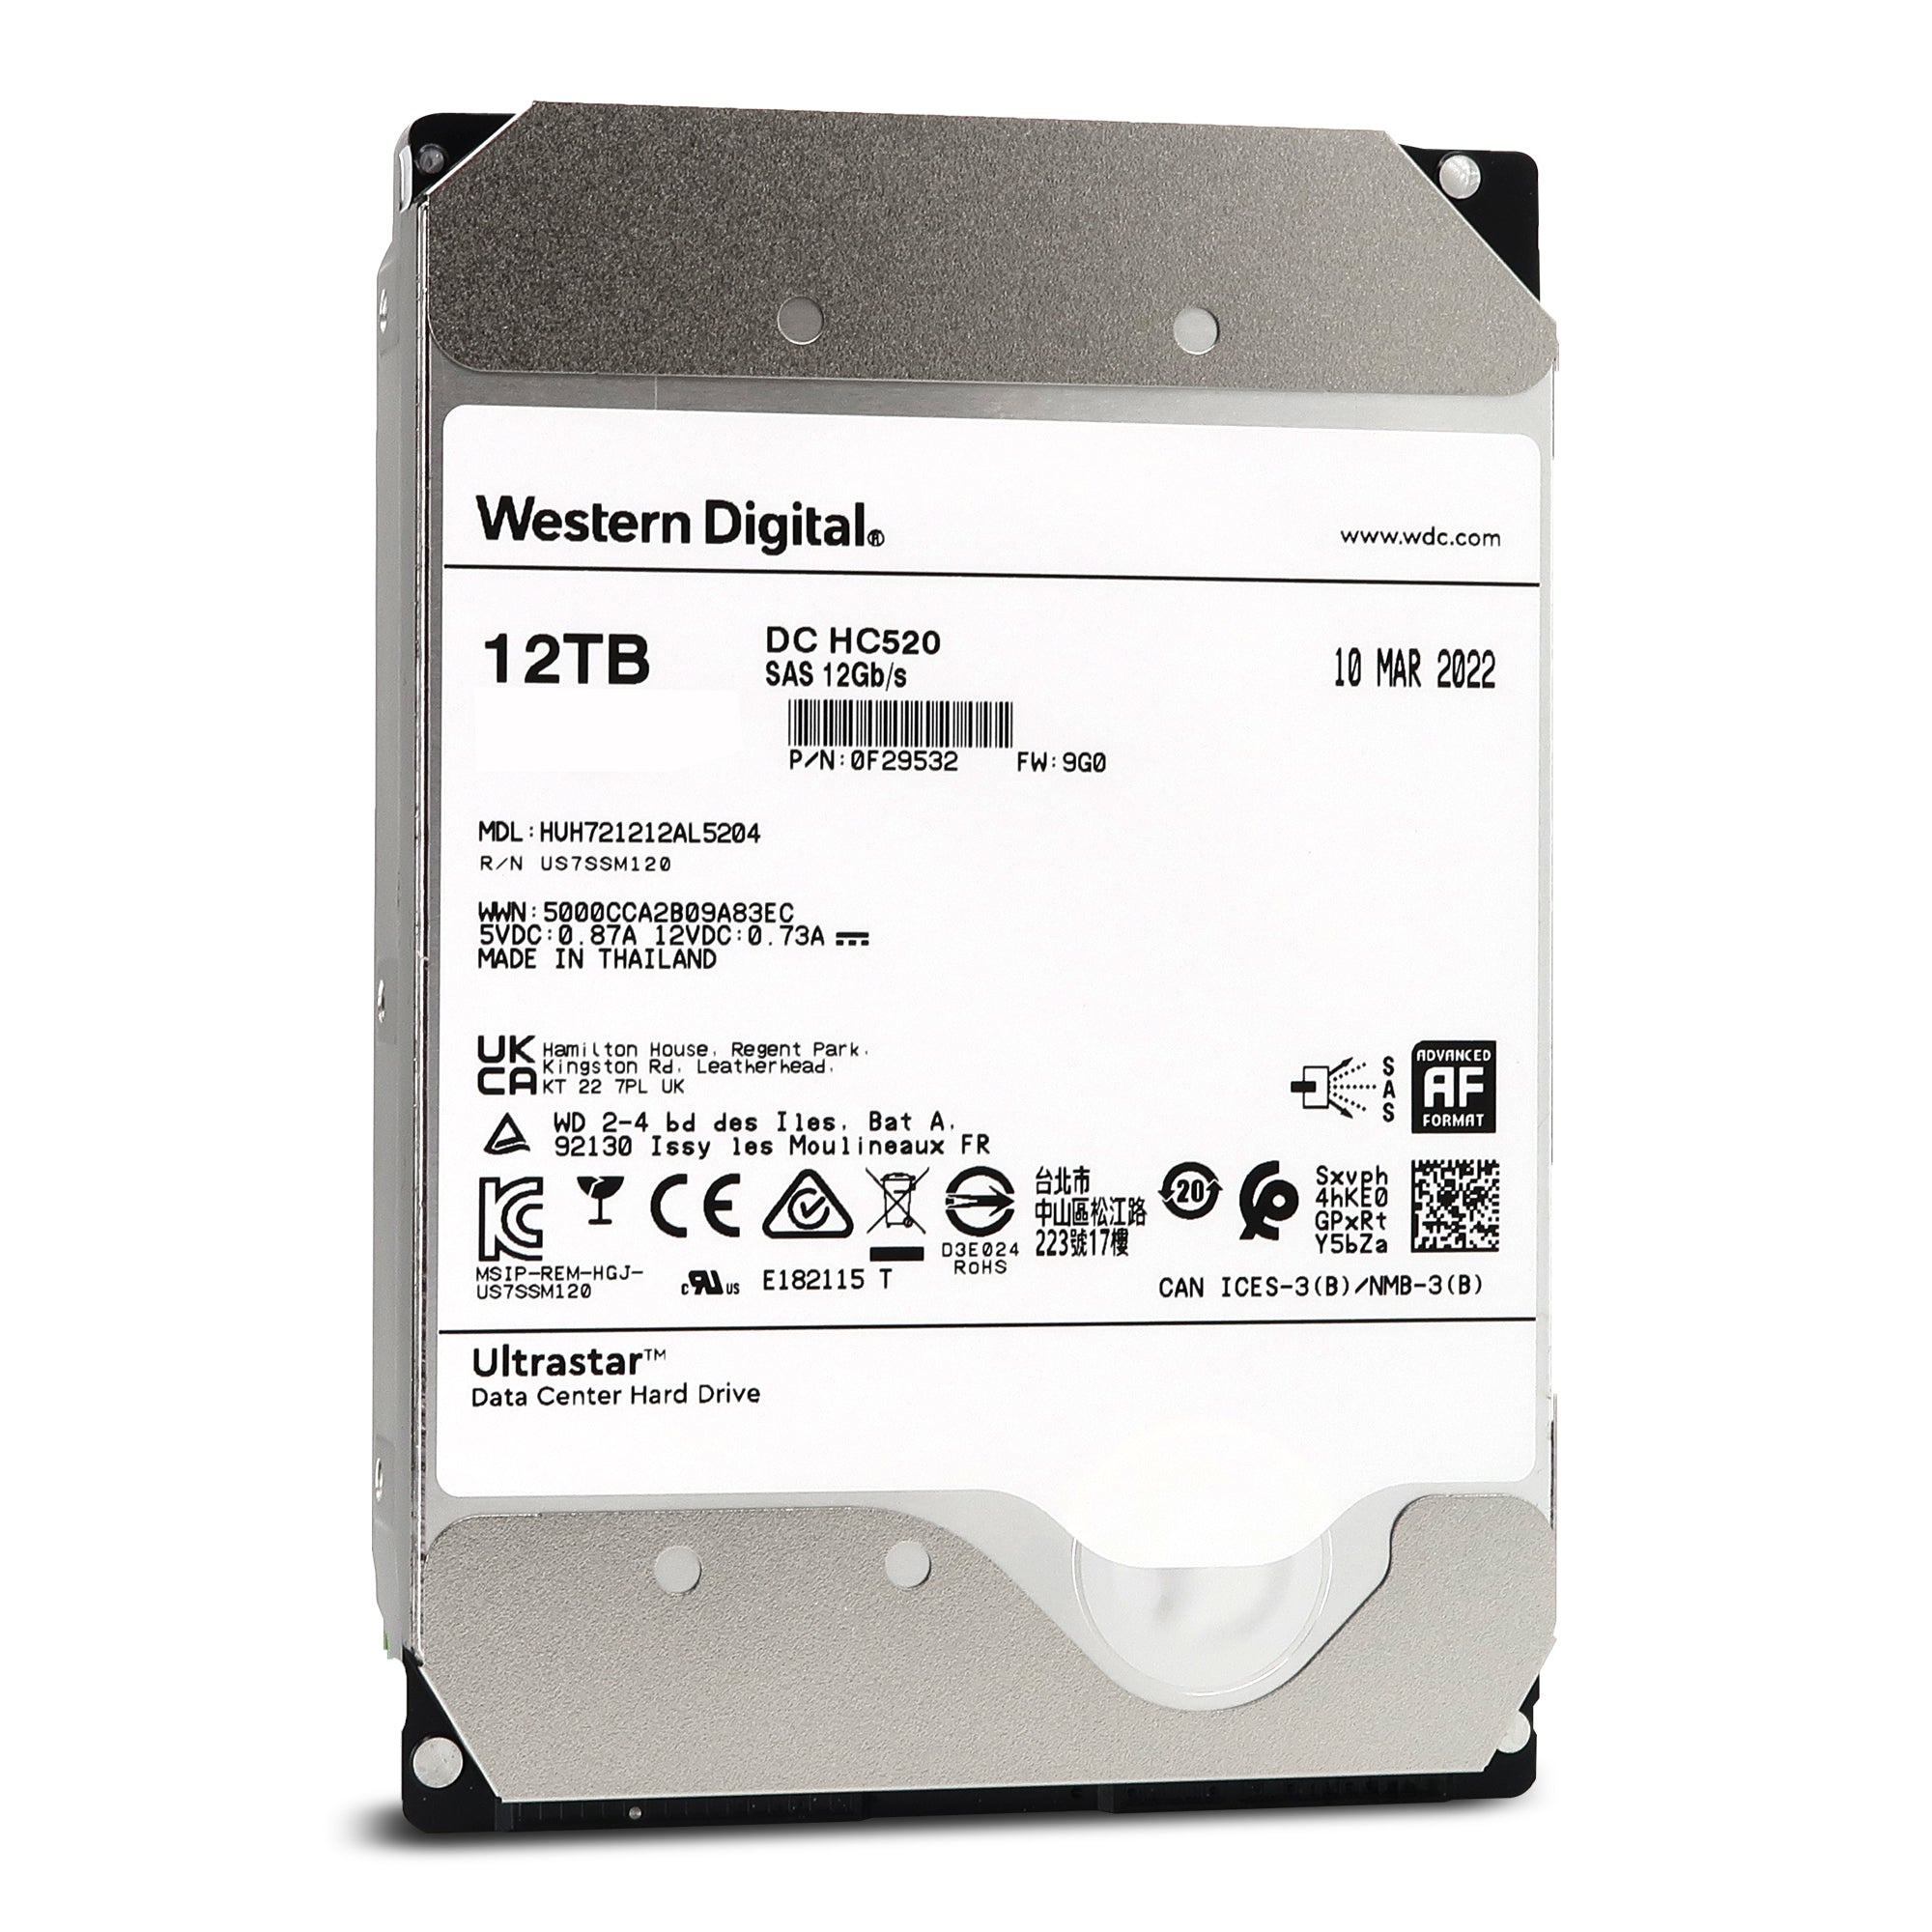 HGST Ultrastar He12 HUH721212AL5204 0F29532 12TB 7.2K RPM SAS 12Gb/s 512e 256MB 3.5" SE Hard Drive Front View